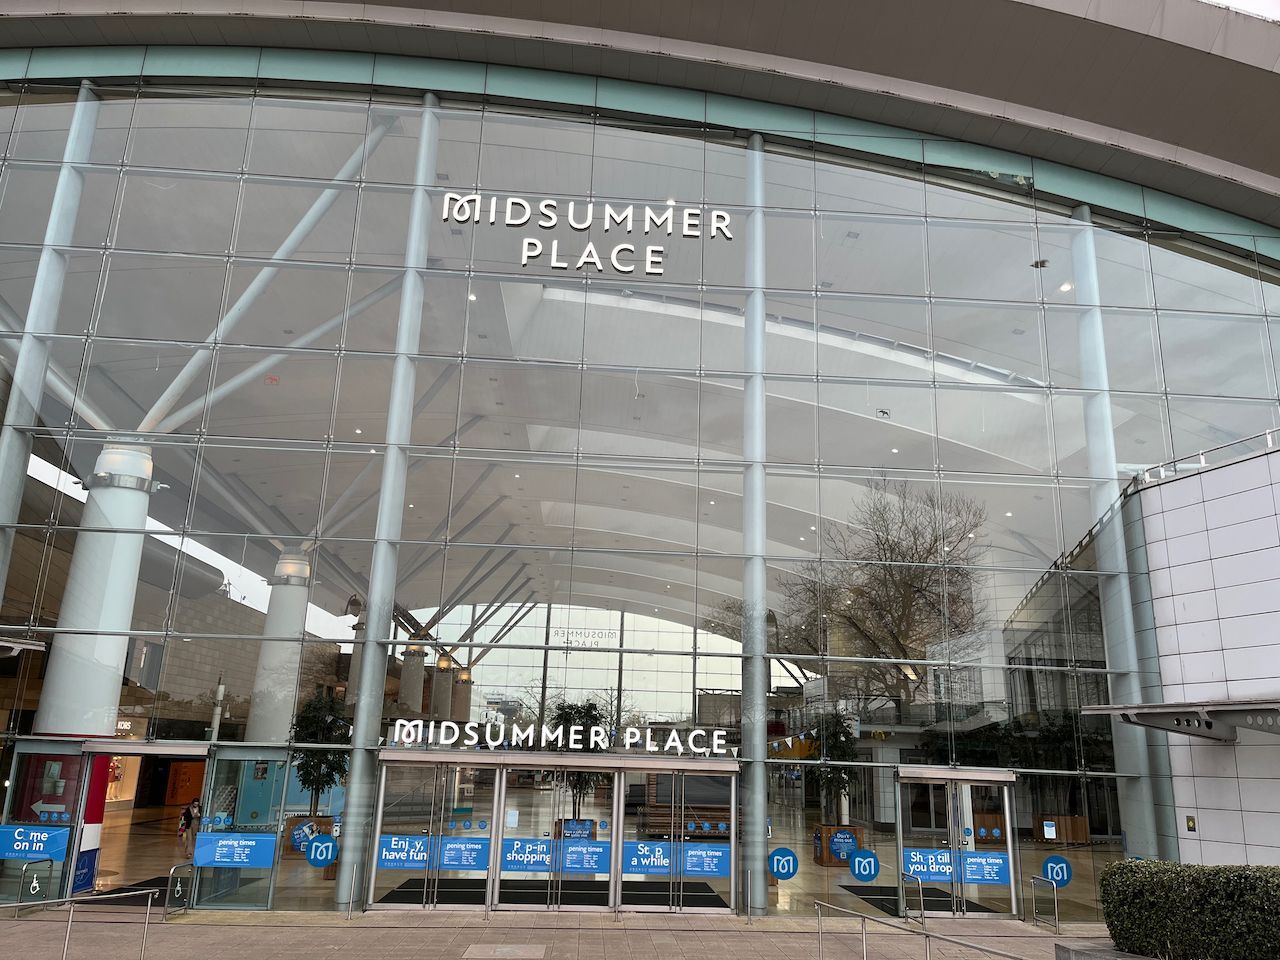 Lane7 and Frasers Group's Sport Direct are latest additions to Midsummer Place in Milton Keynes